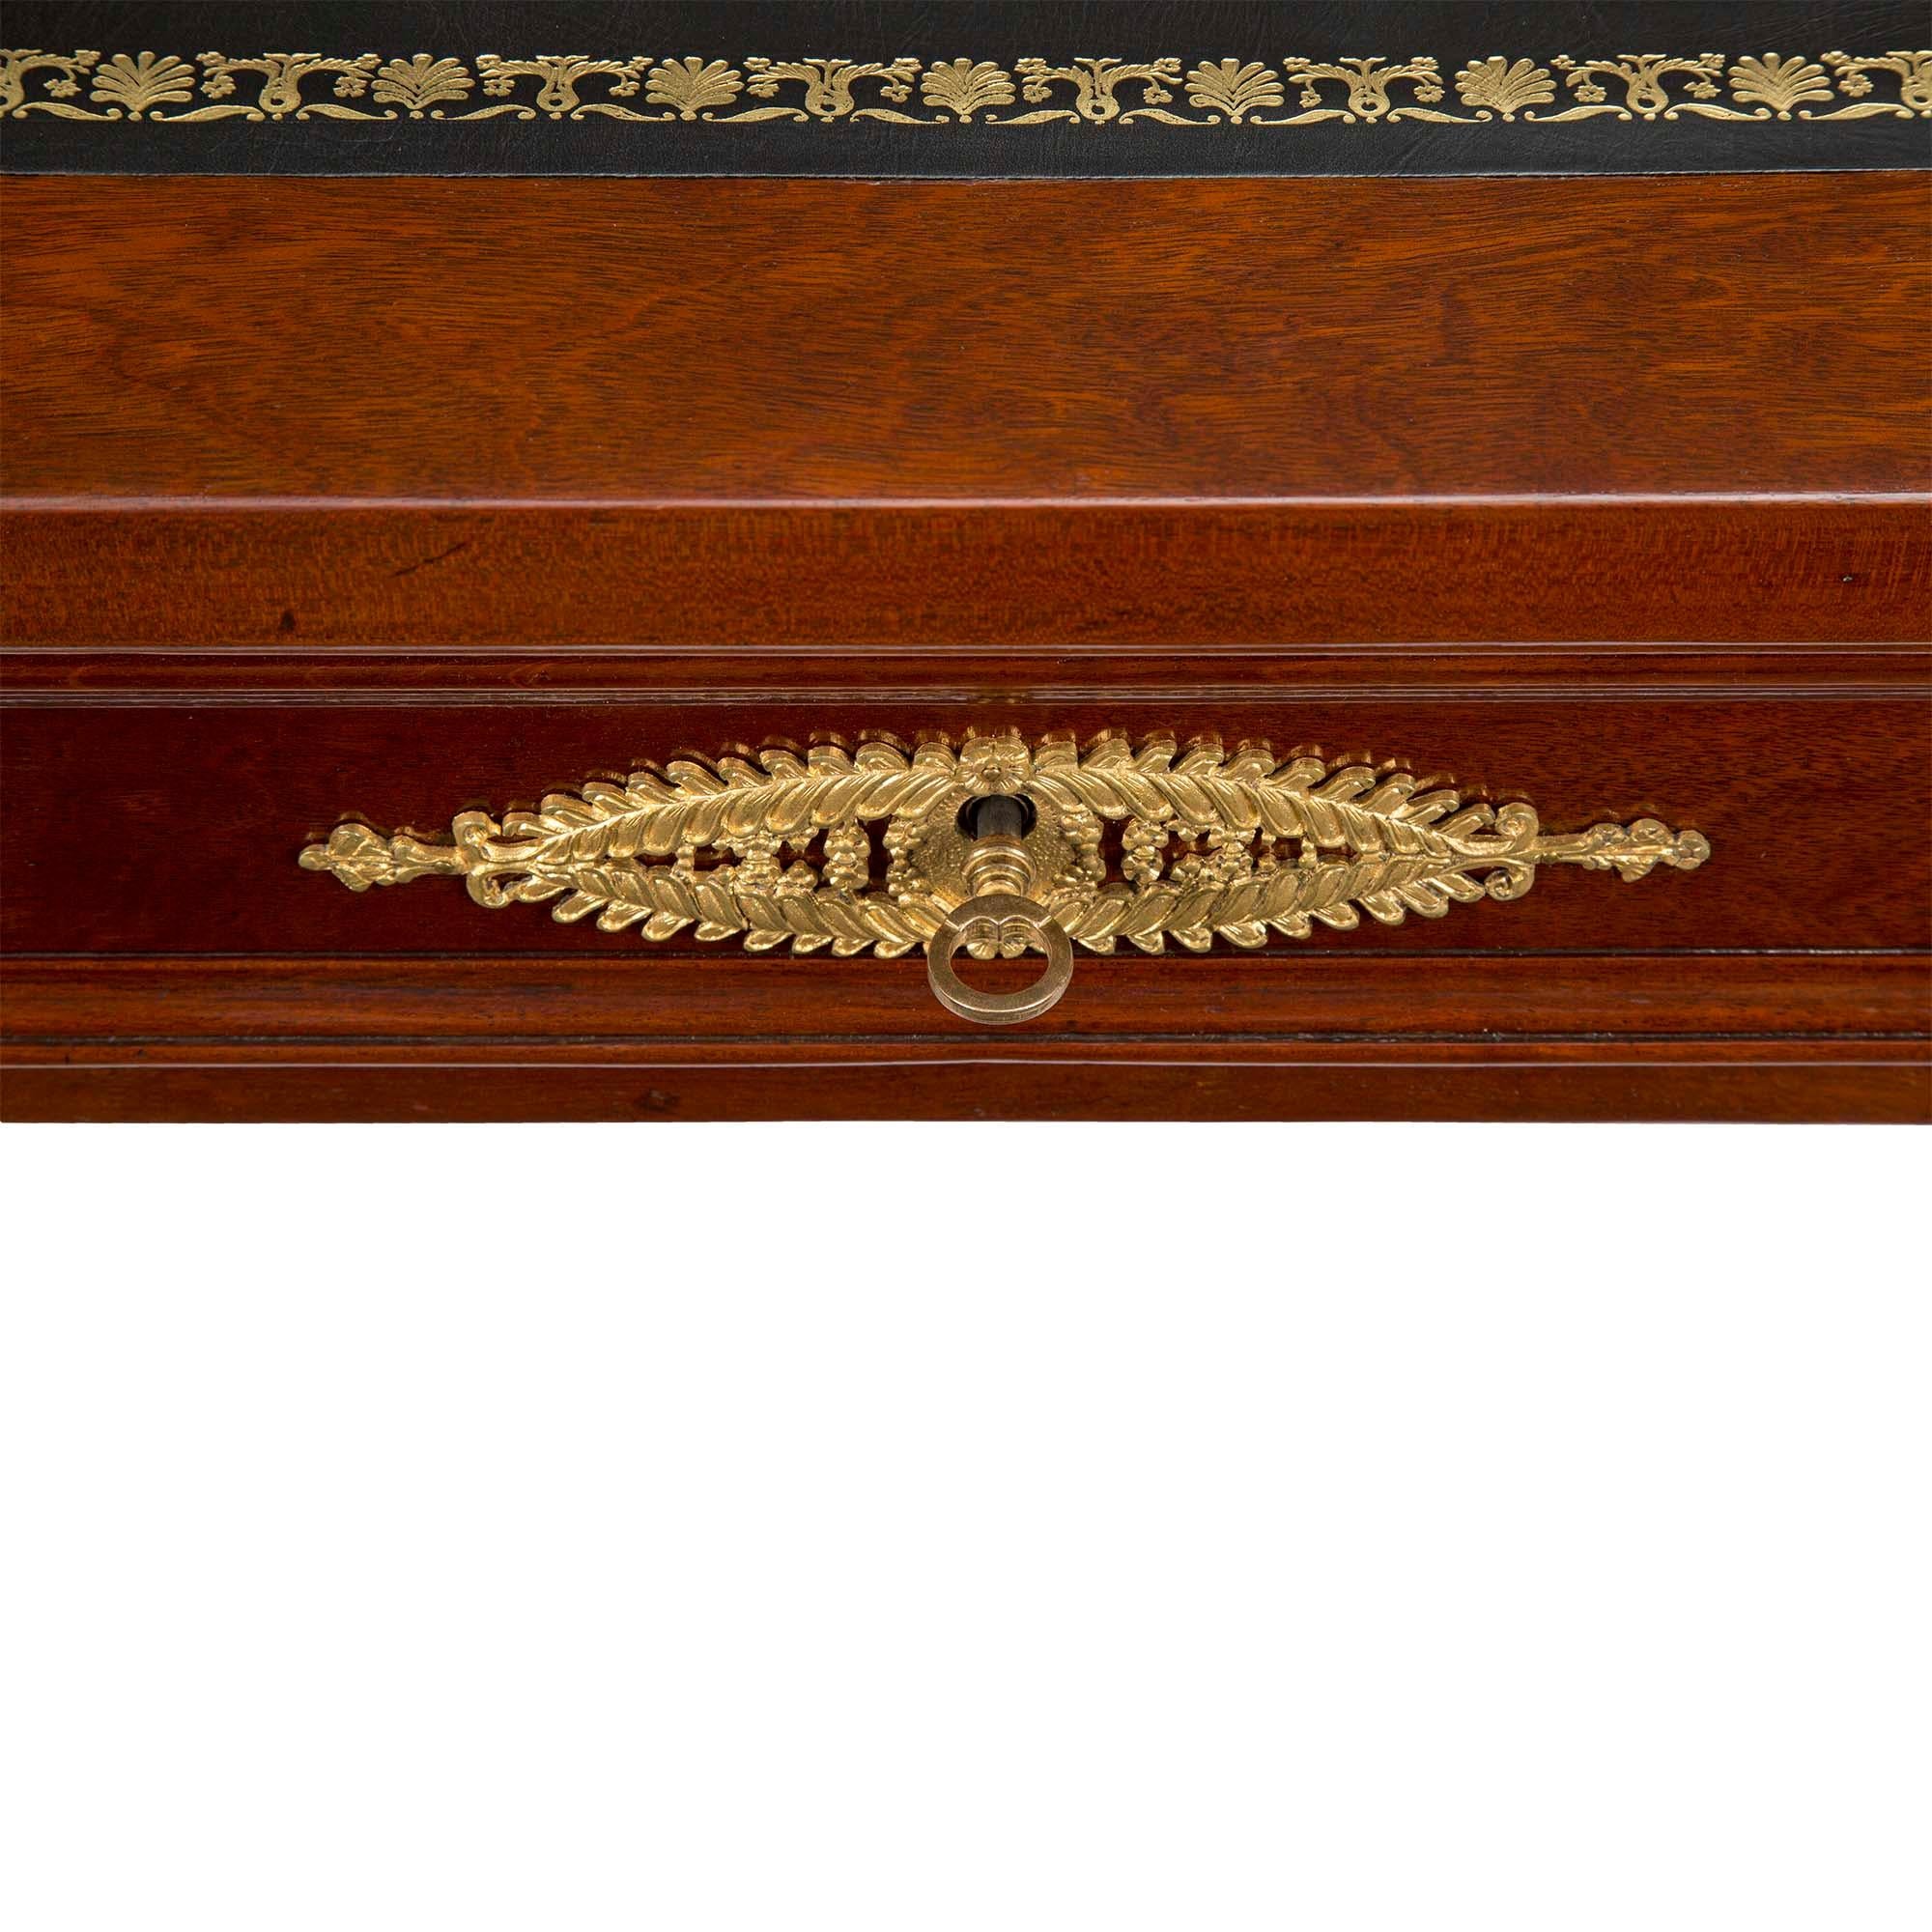 French 19th Century Empire Style Mahogany and Ormolu Bureau Plat For Sale 7